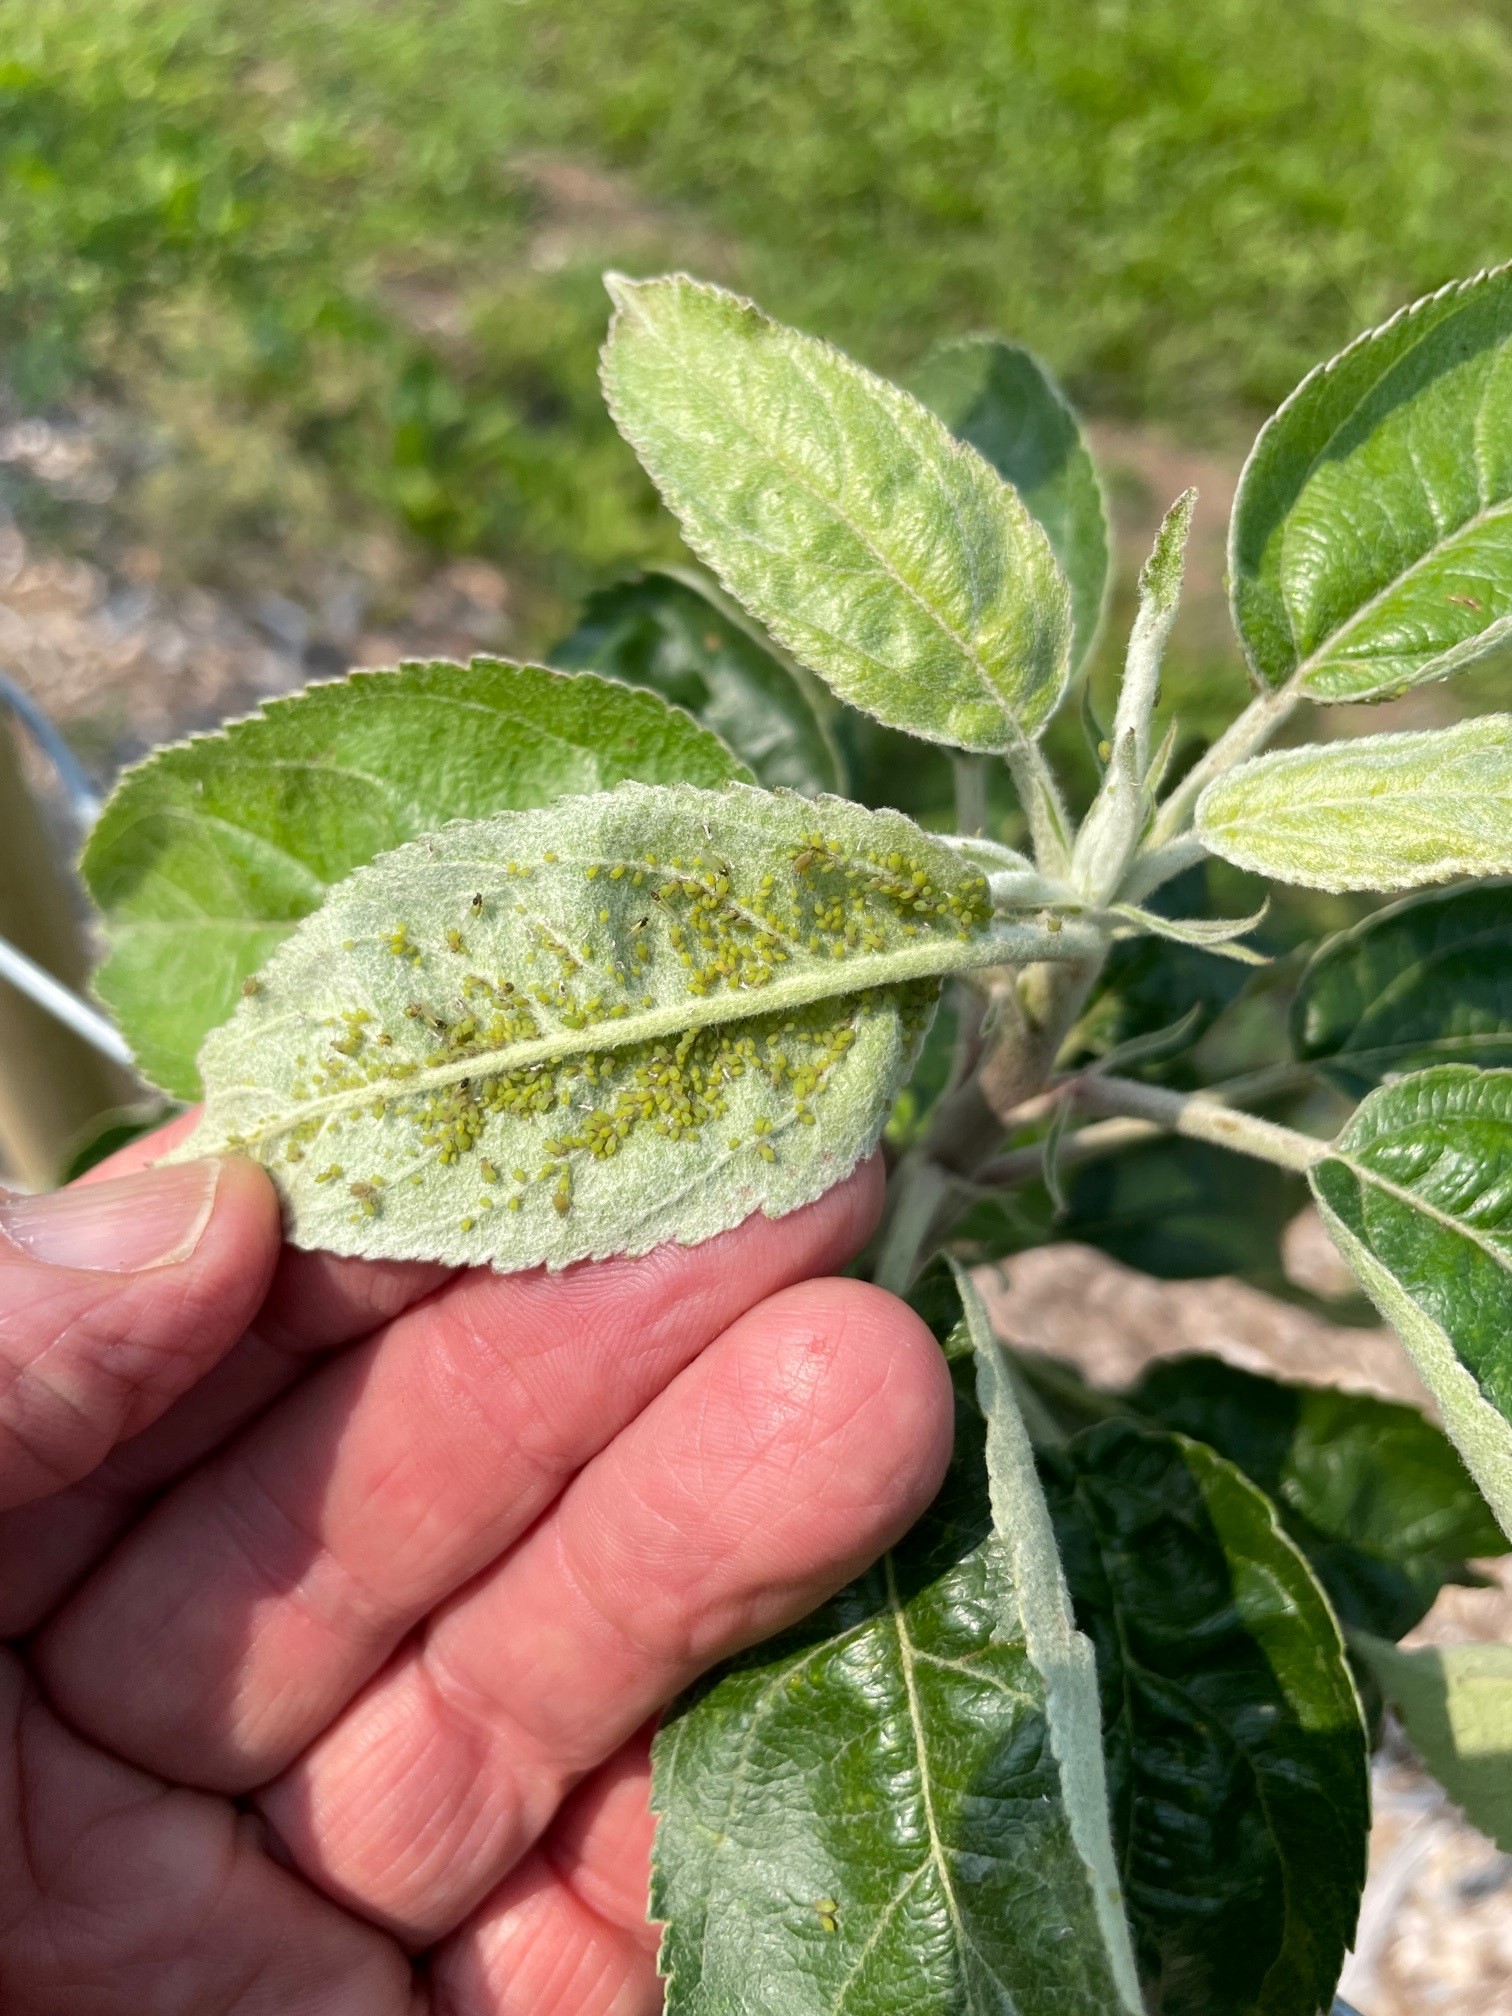 Green apple aphids on apple leaves.